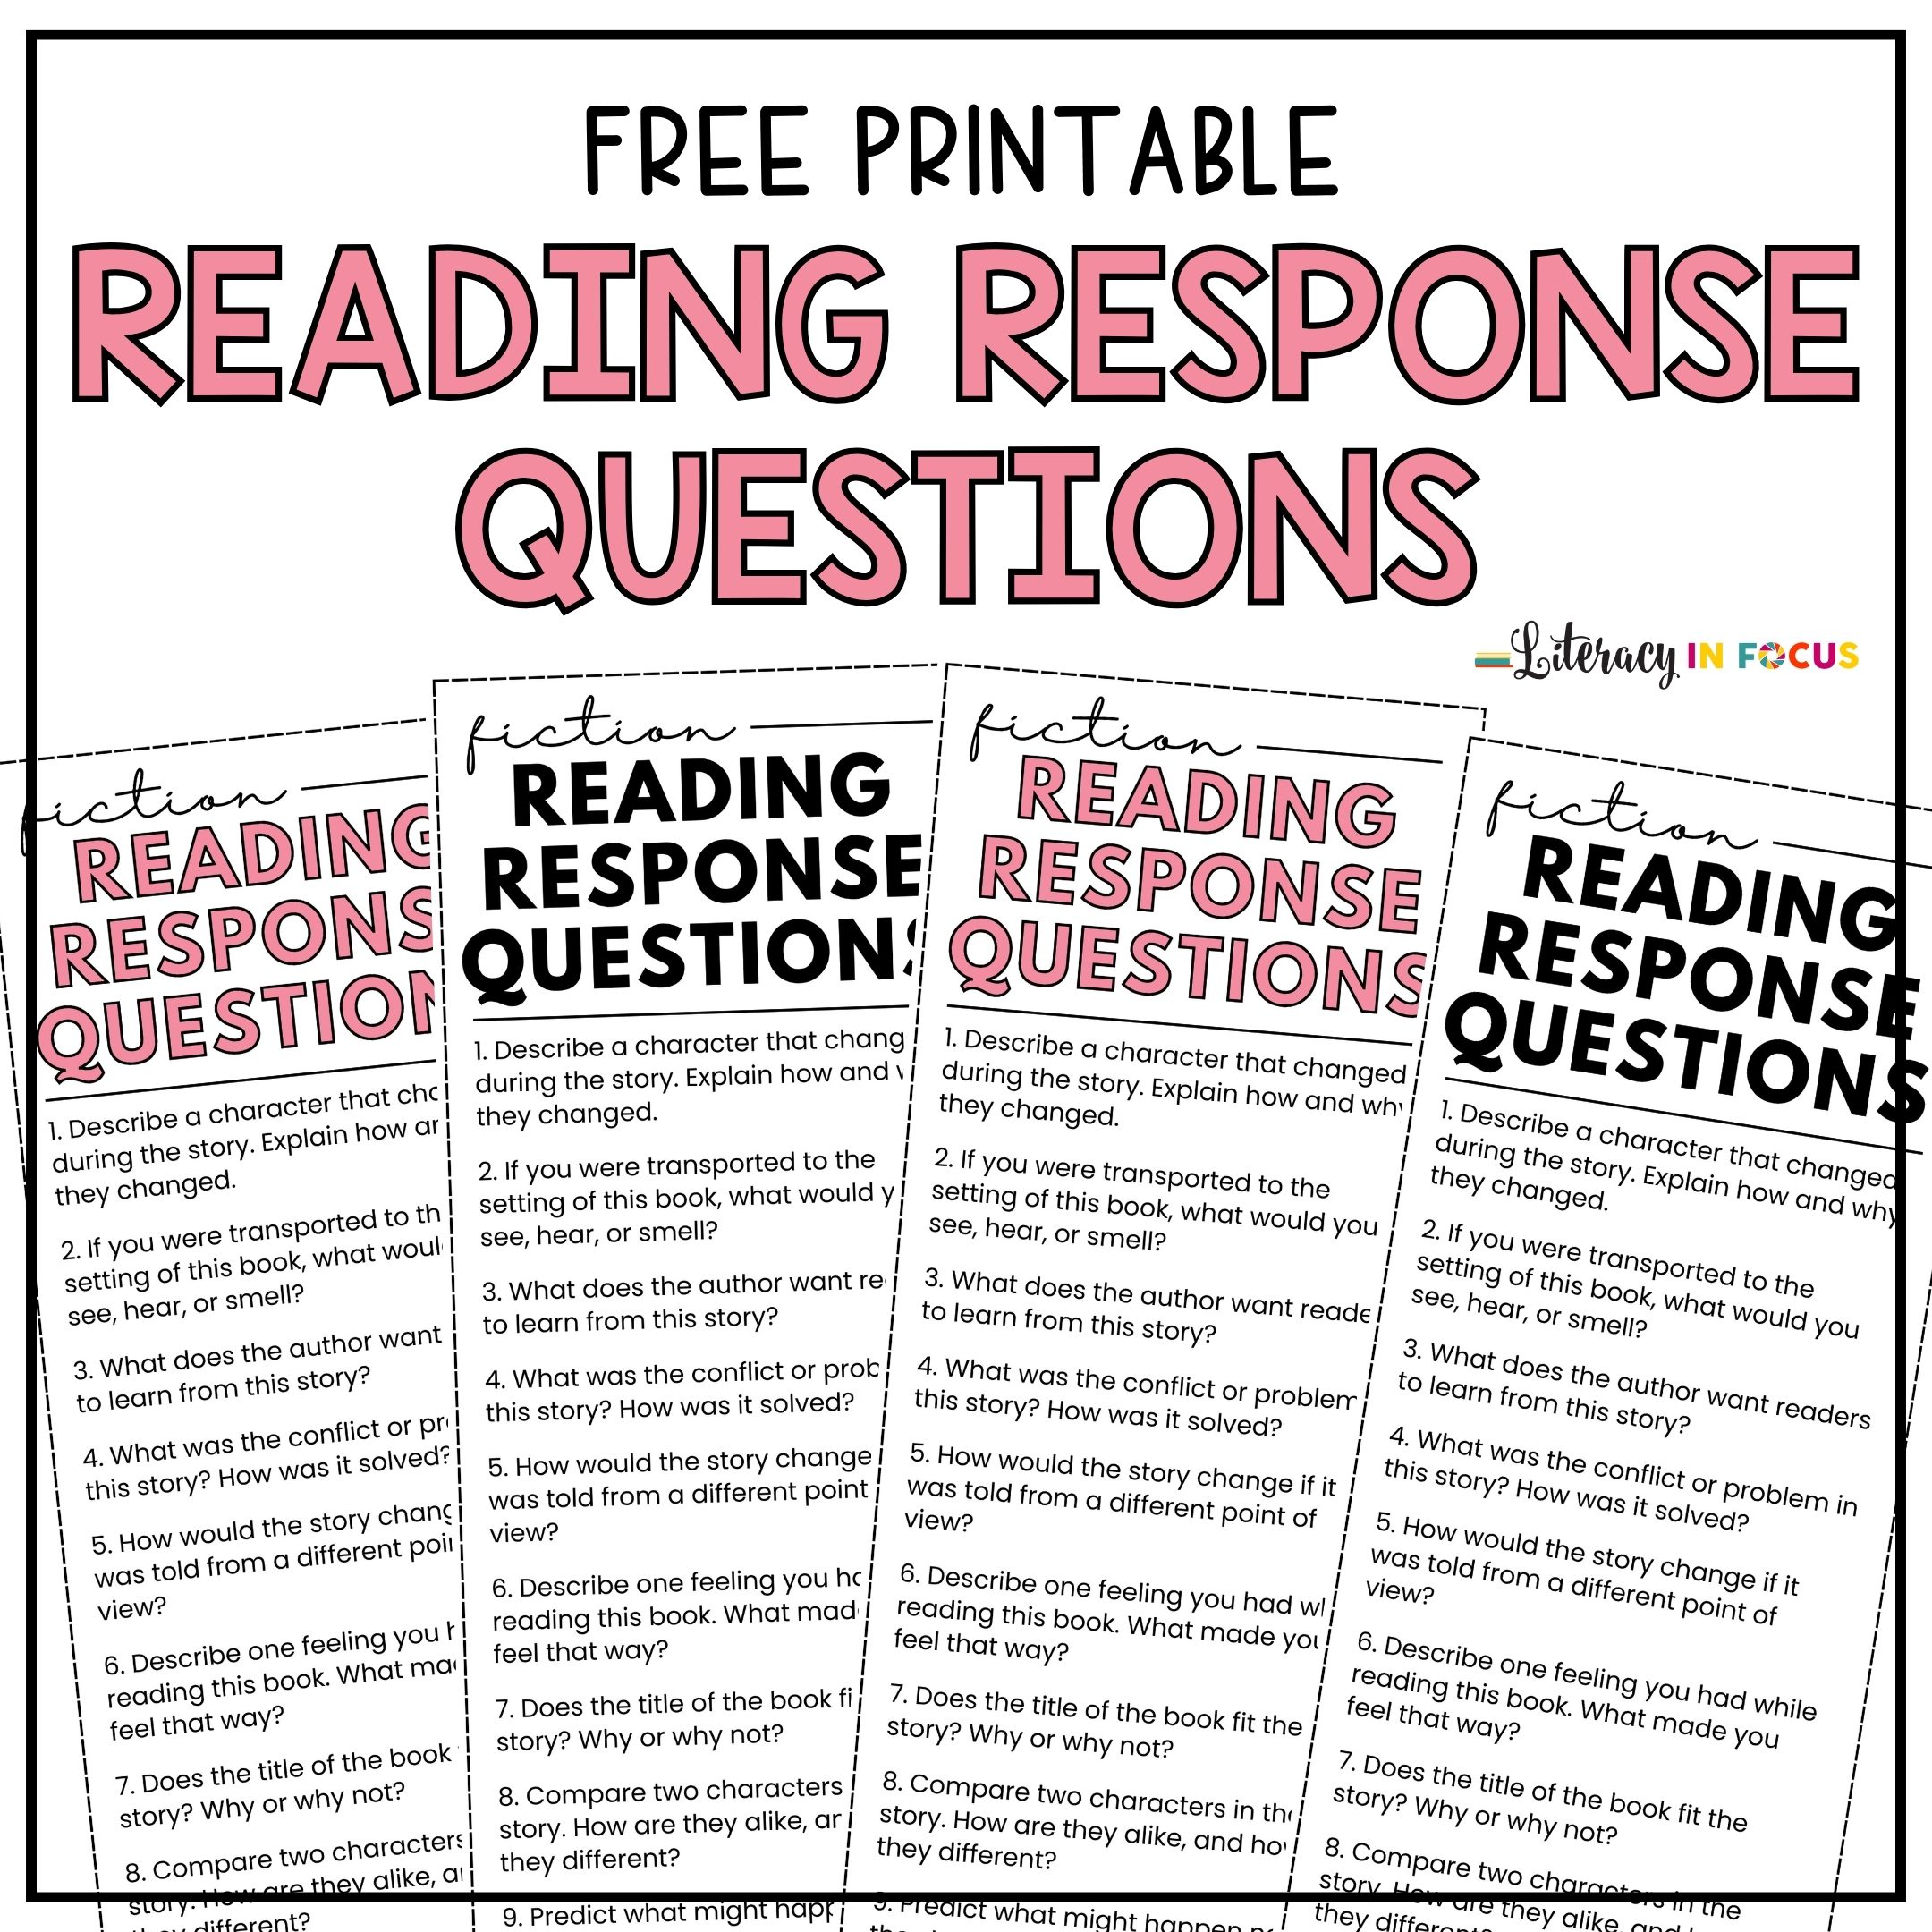 Free Printable Reading response questions